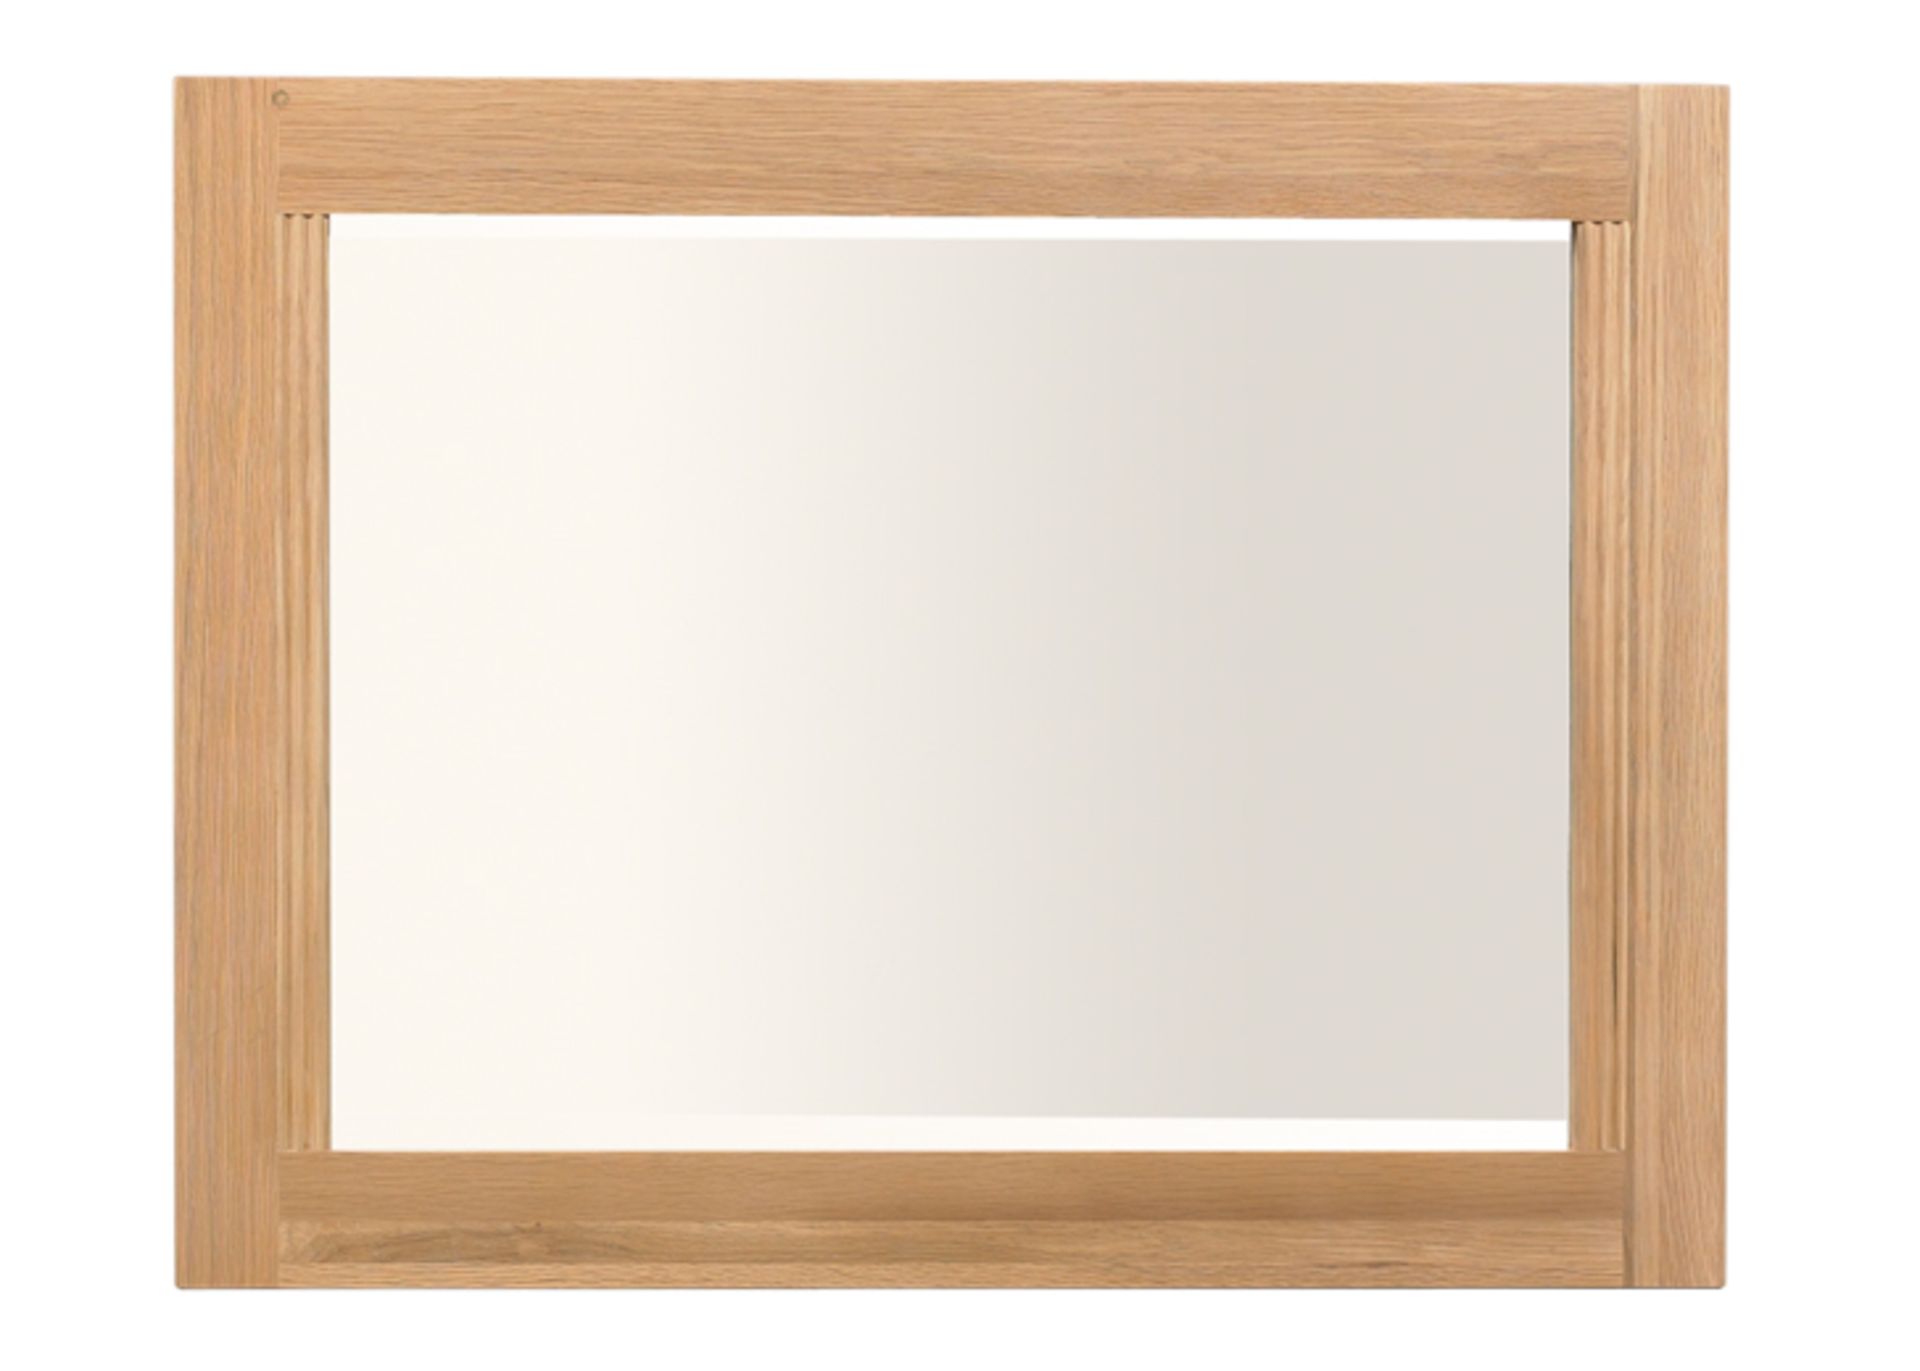 1 x Mark Webster Buckingham Wall Mirror - White Wash Oak With a Timeless Design - Full of - Image 2 of 2